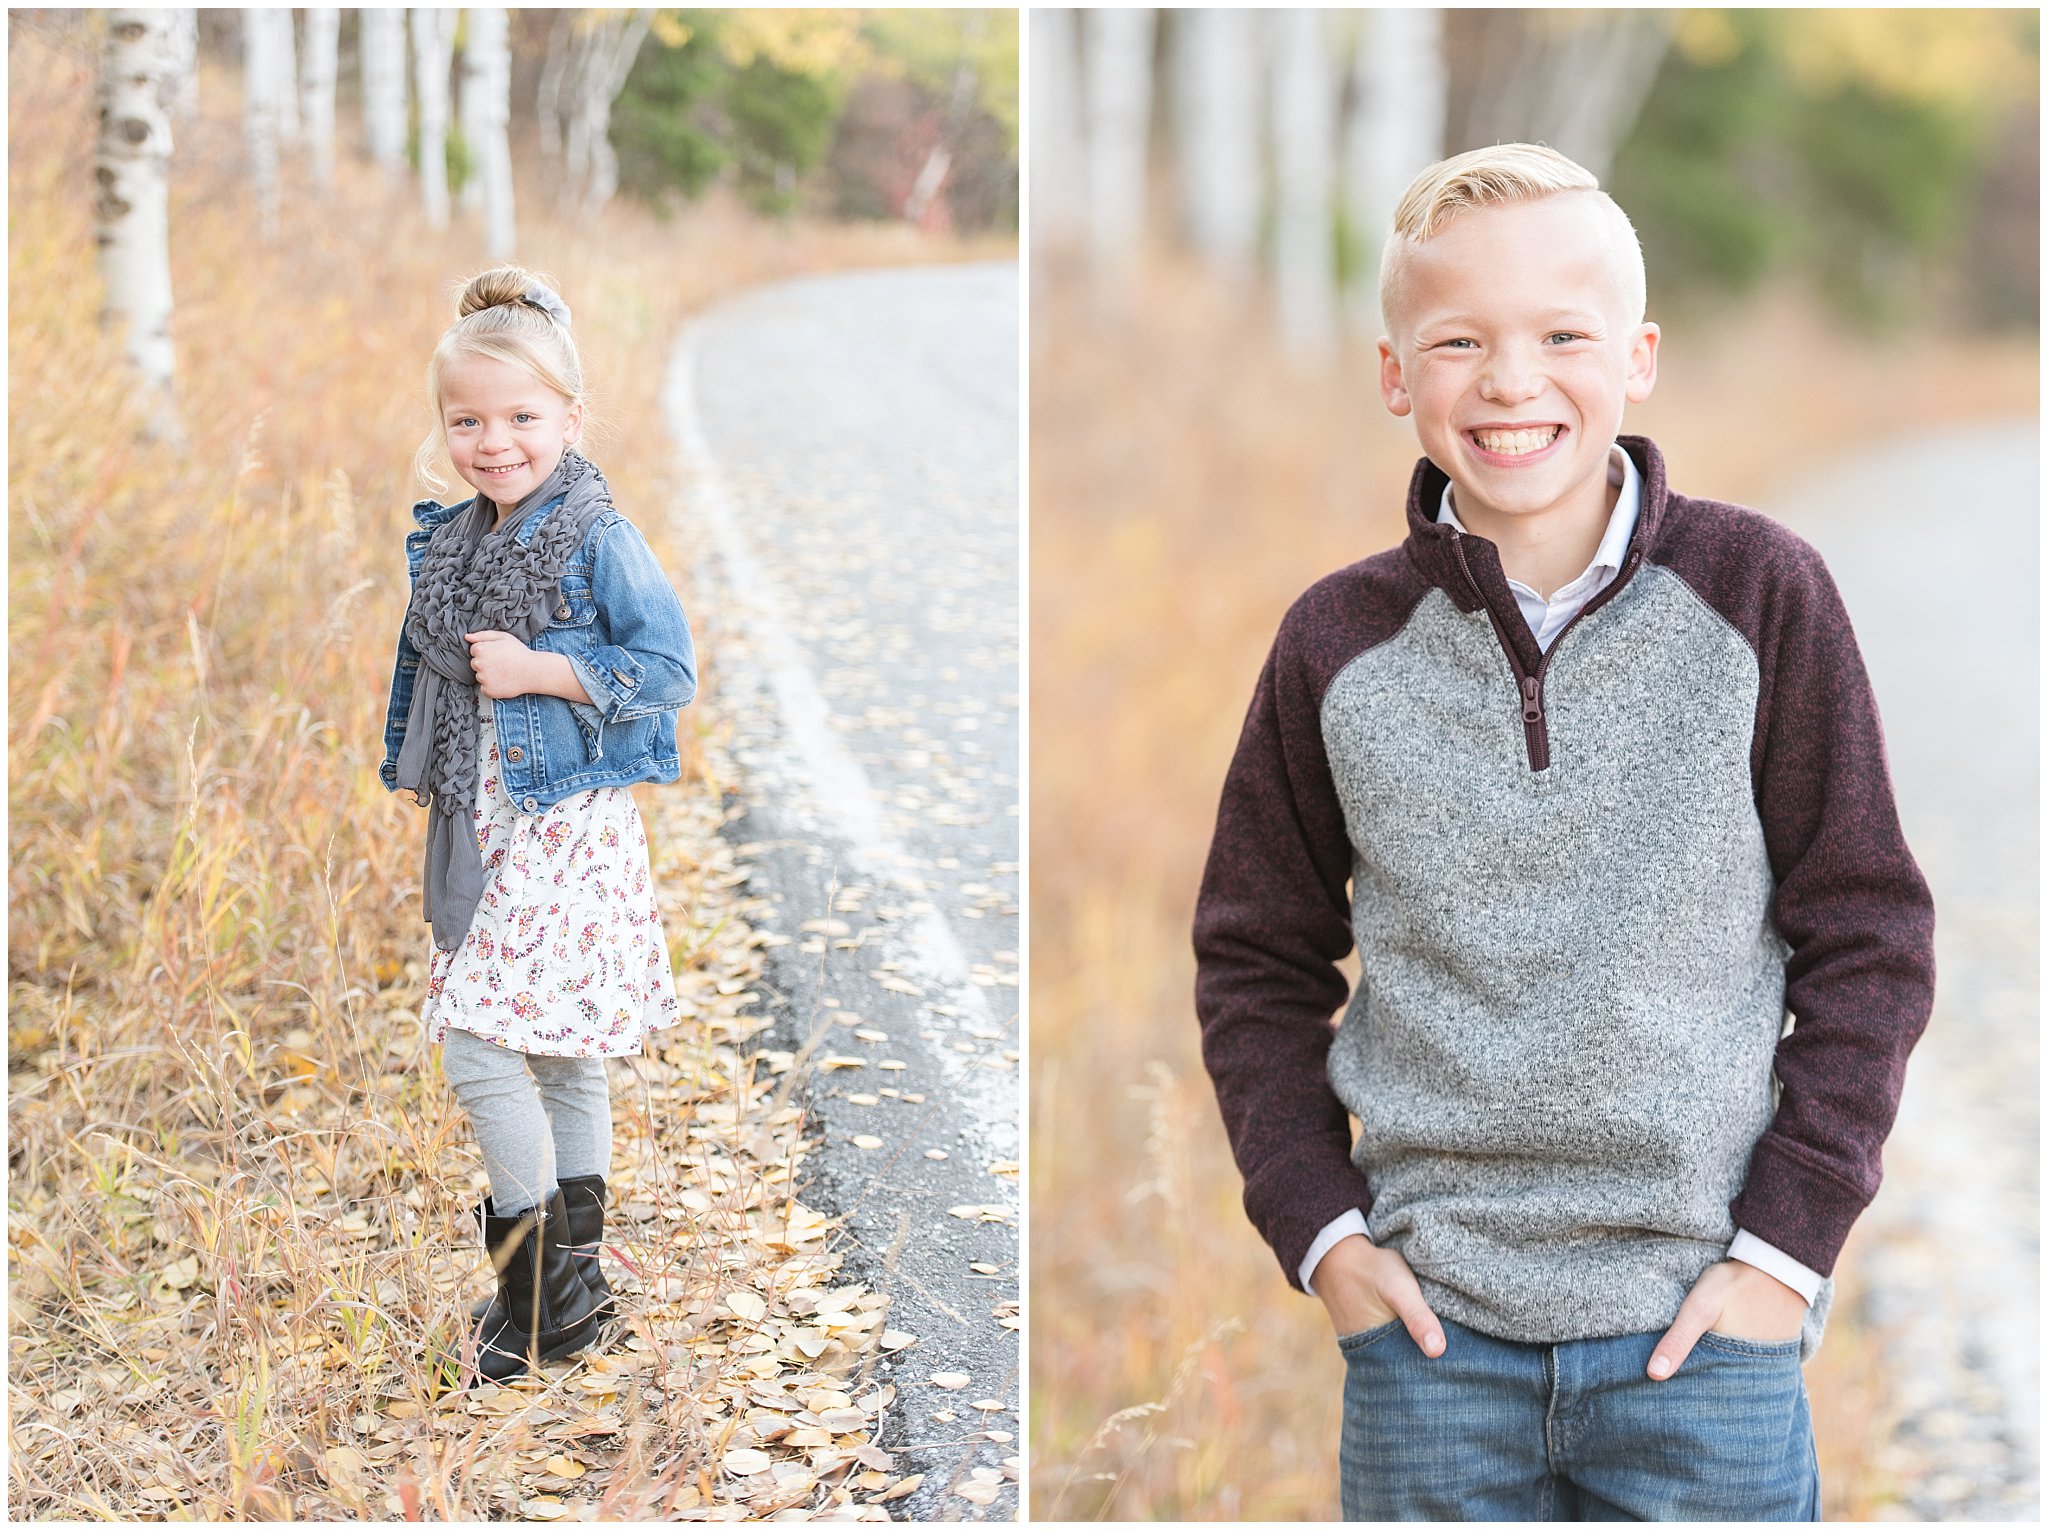 Portraits of kids during fall family pictures | Fall Family Pictures in the Mountains | Snowbasin, Utah | Jessie and Dallin Photography